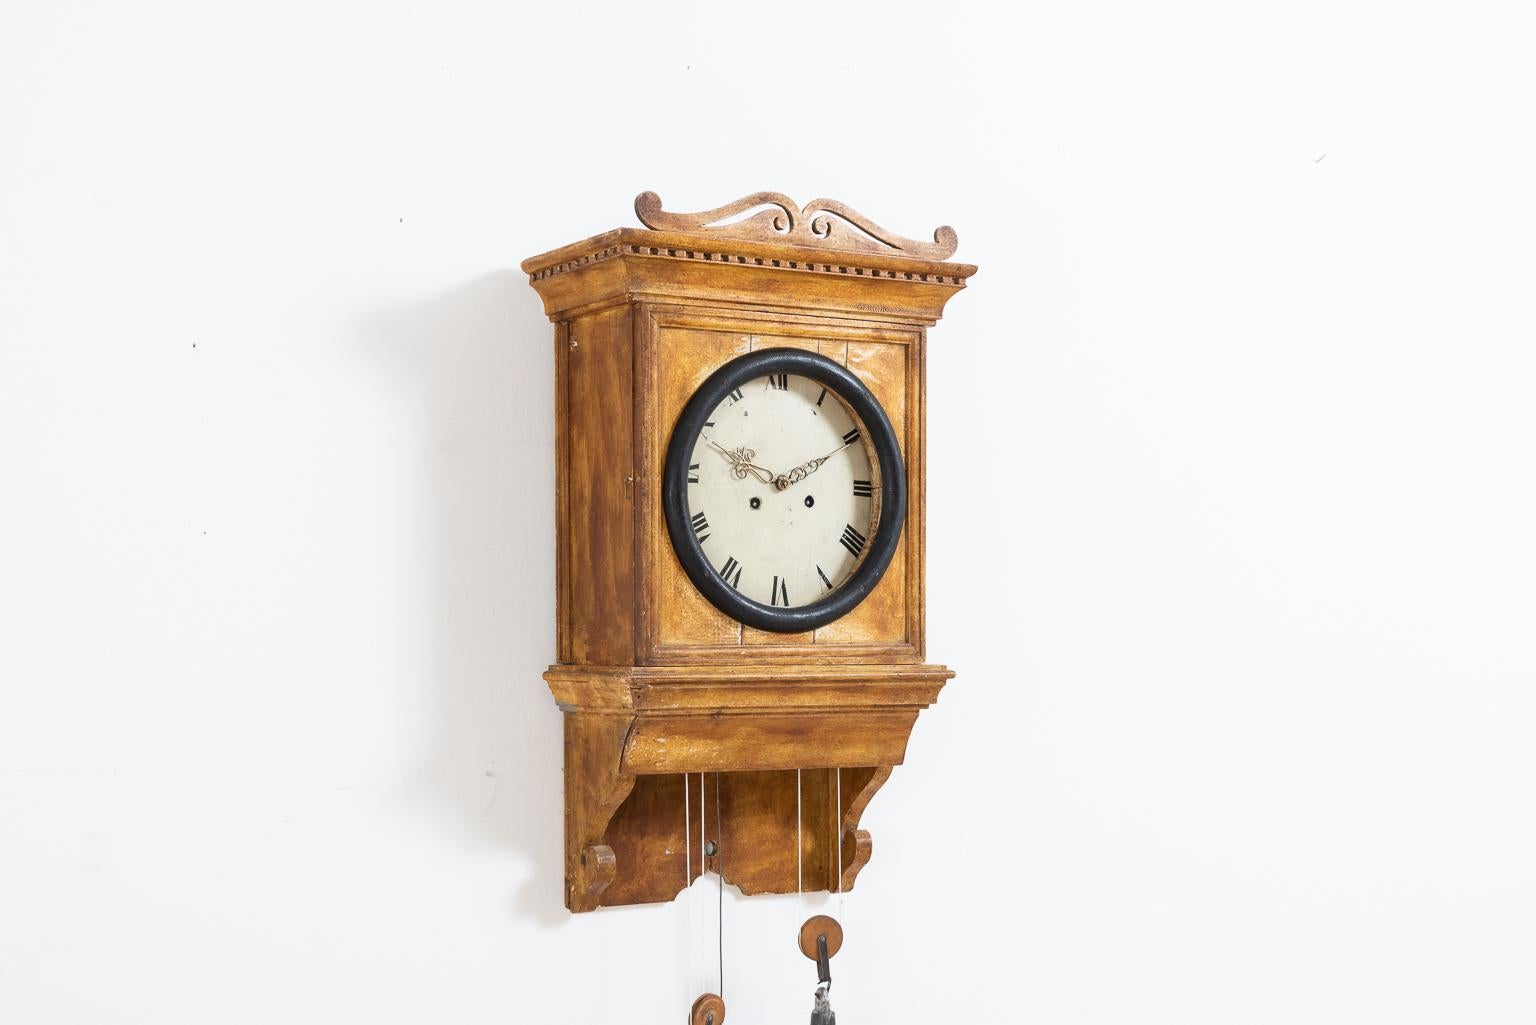 Folk Art wall clock made during the first half of the 19th century. The clock is in untouched condition and with original paint. The mechanism is the same as it is in classic mora clocks. From northern Sweden.